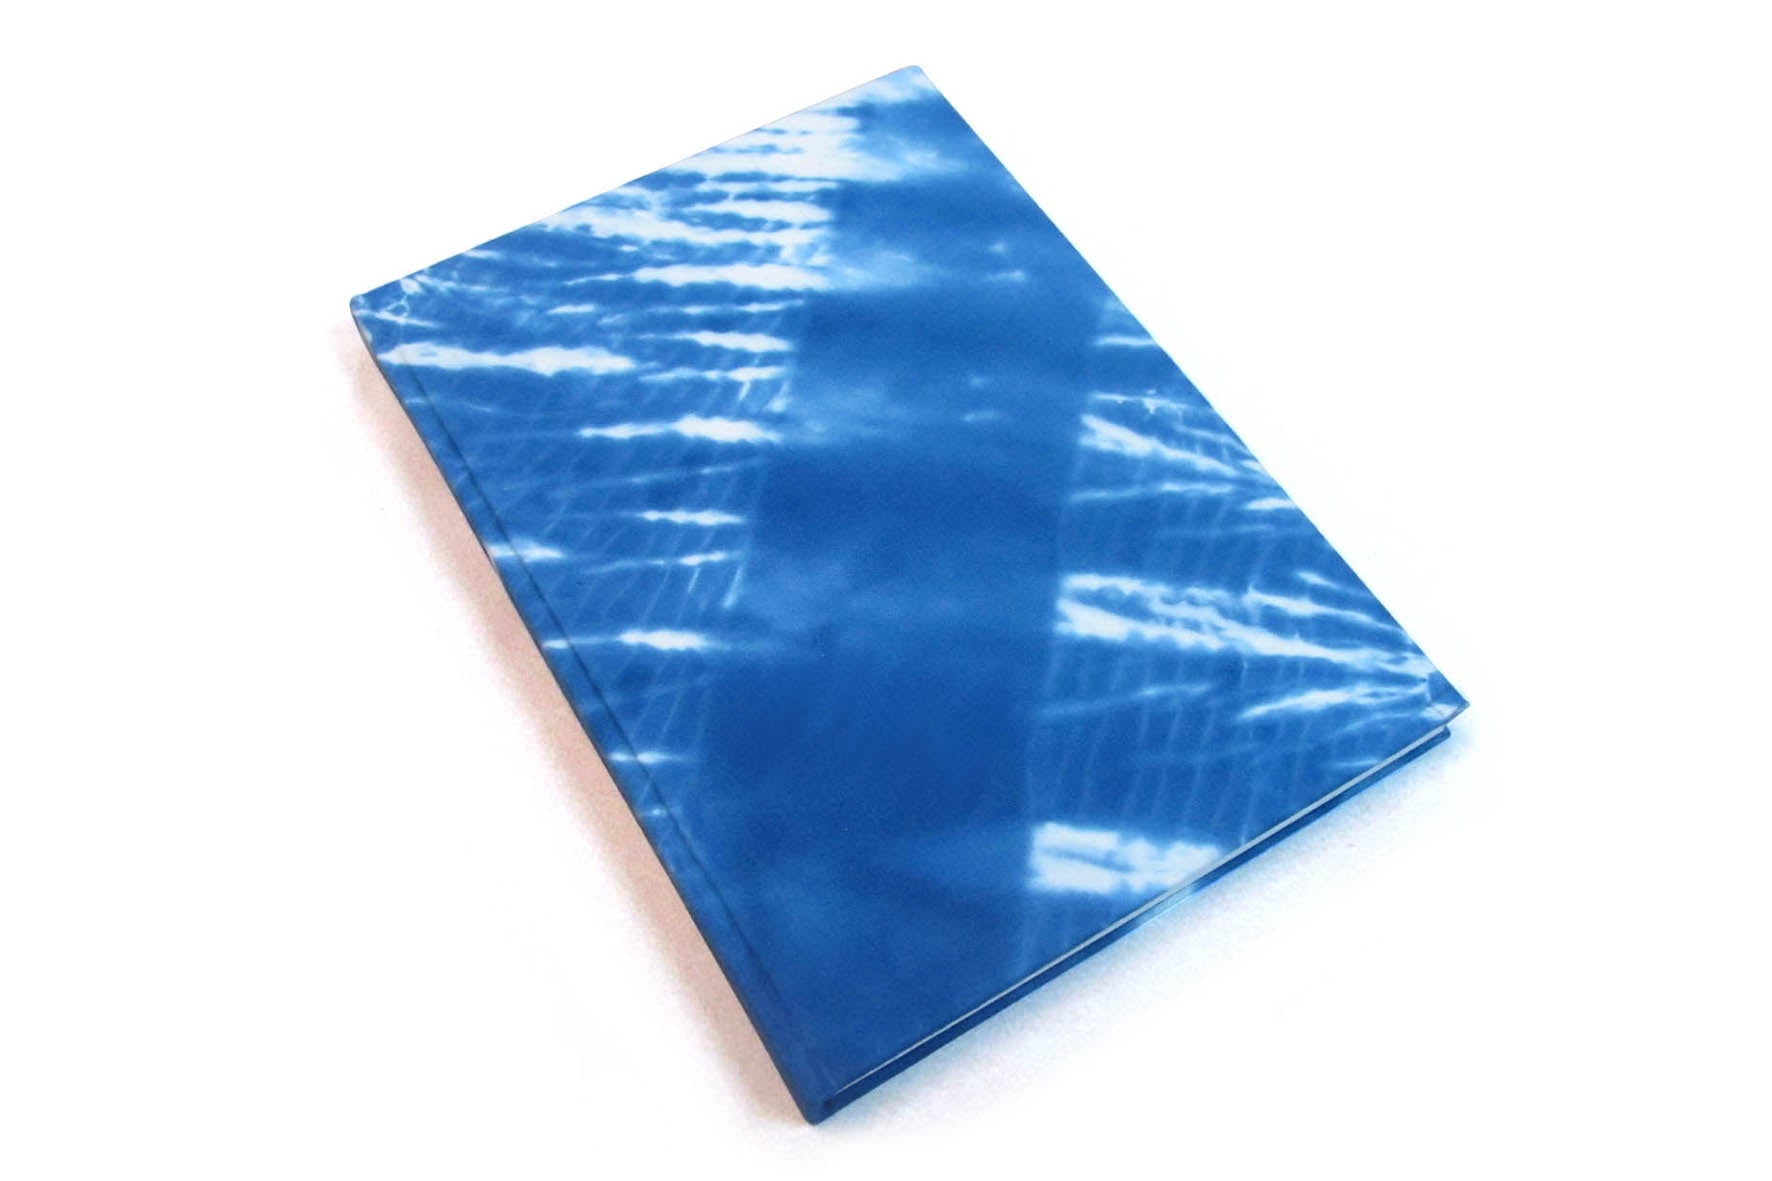 Shibori Diagonal Pattern Full Bound Ruled Pages A5 Notebook Online